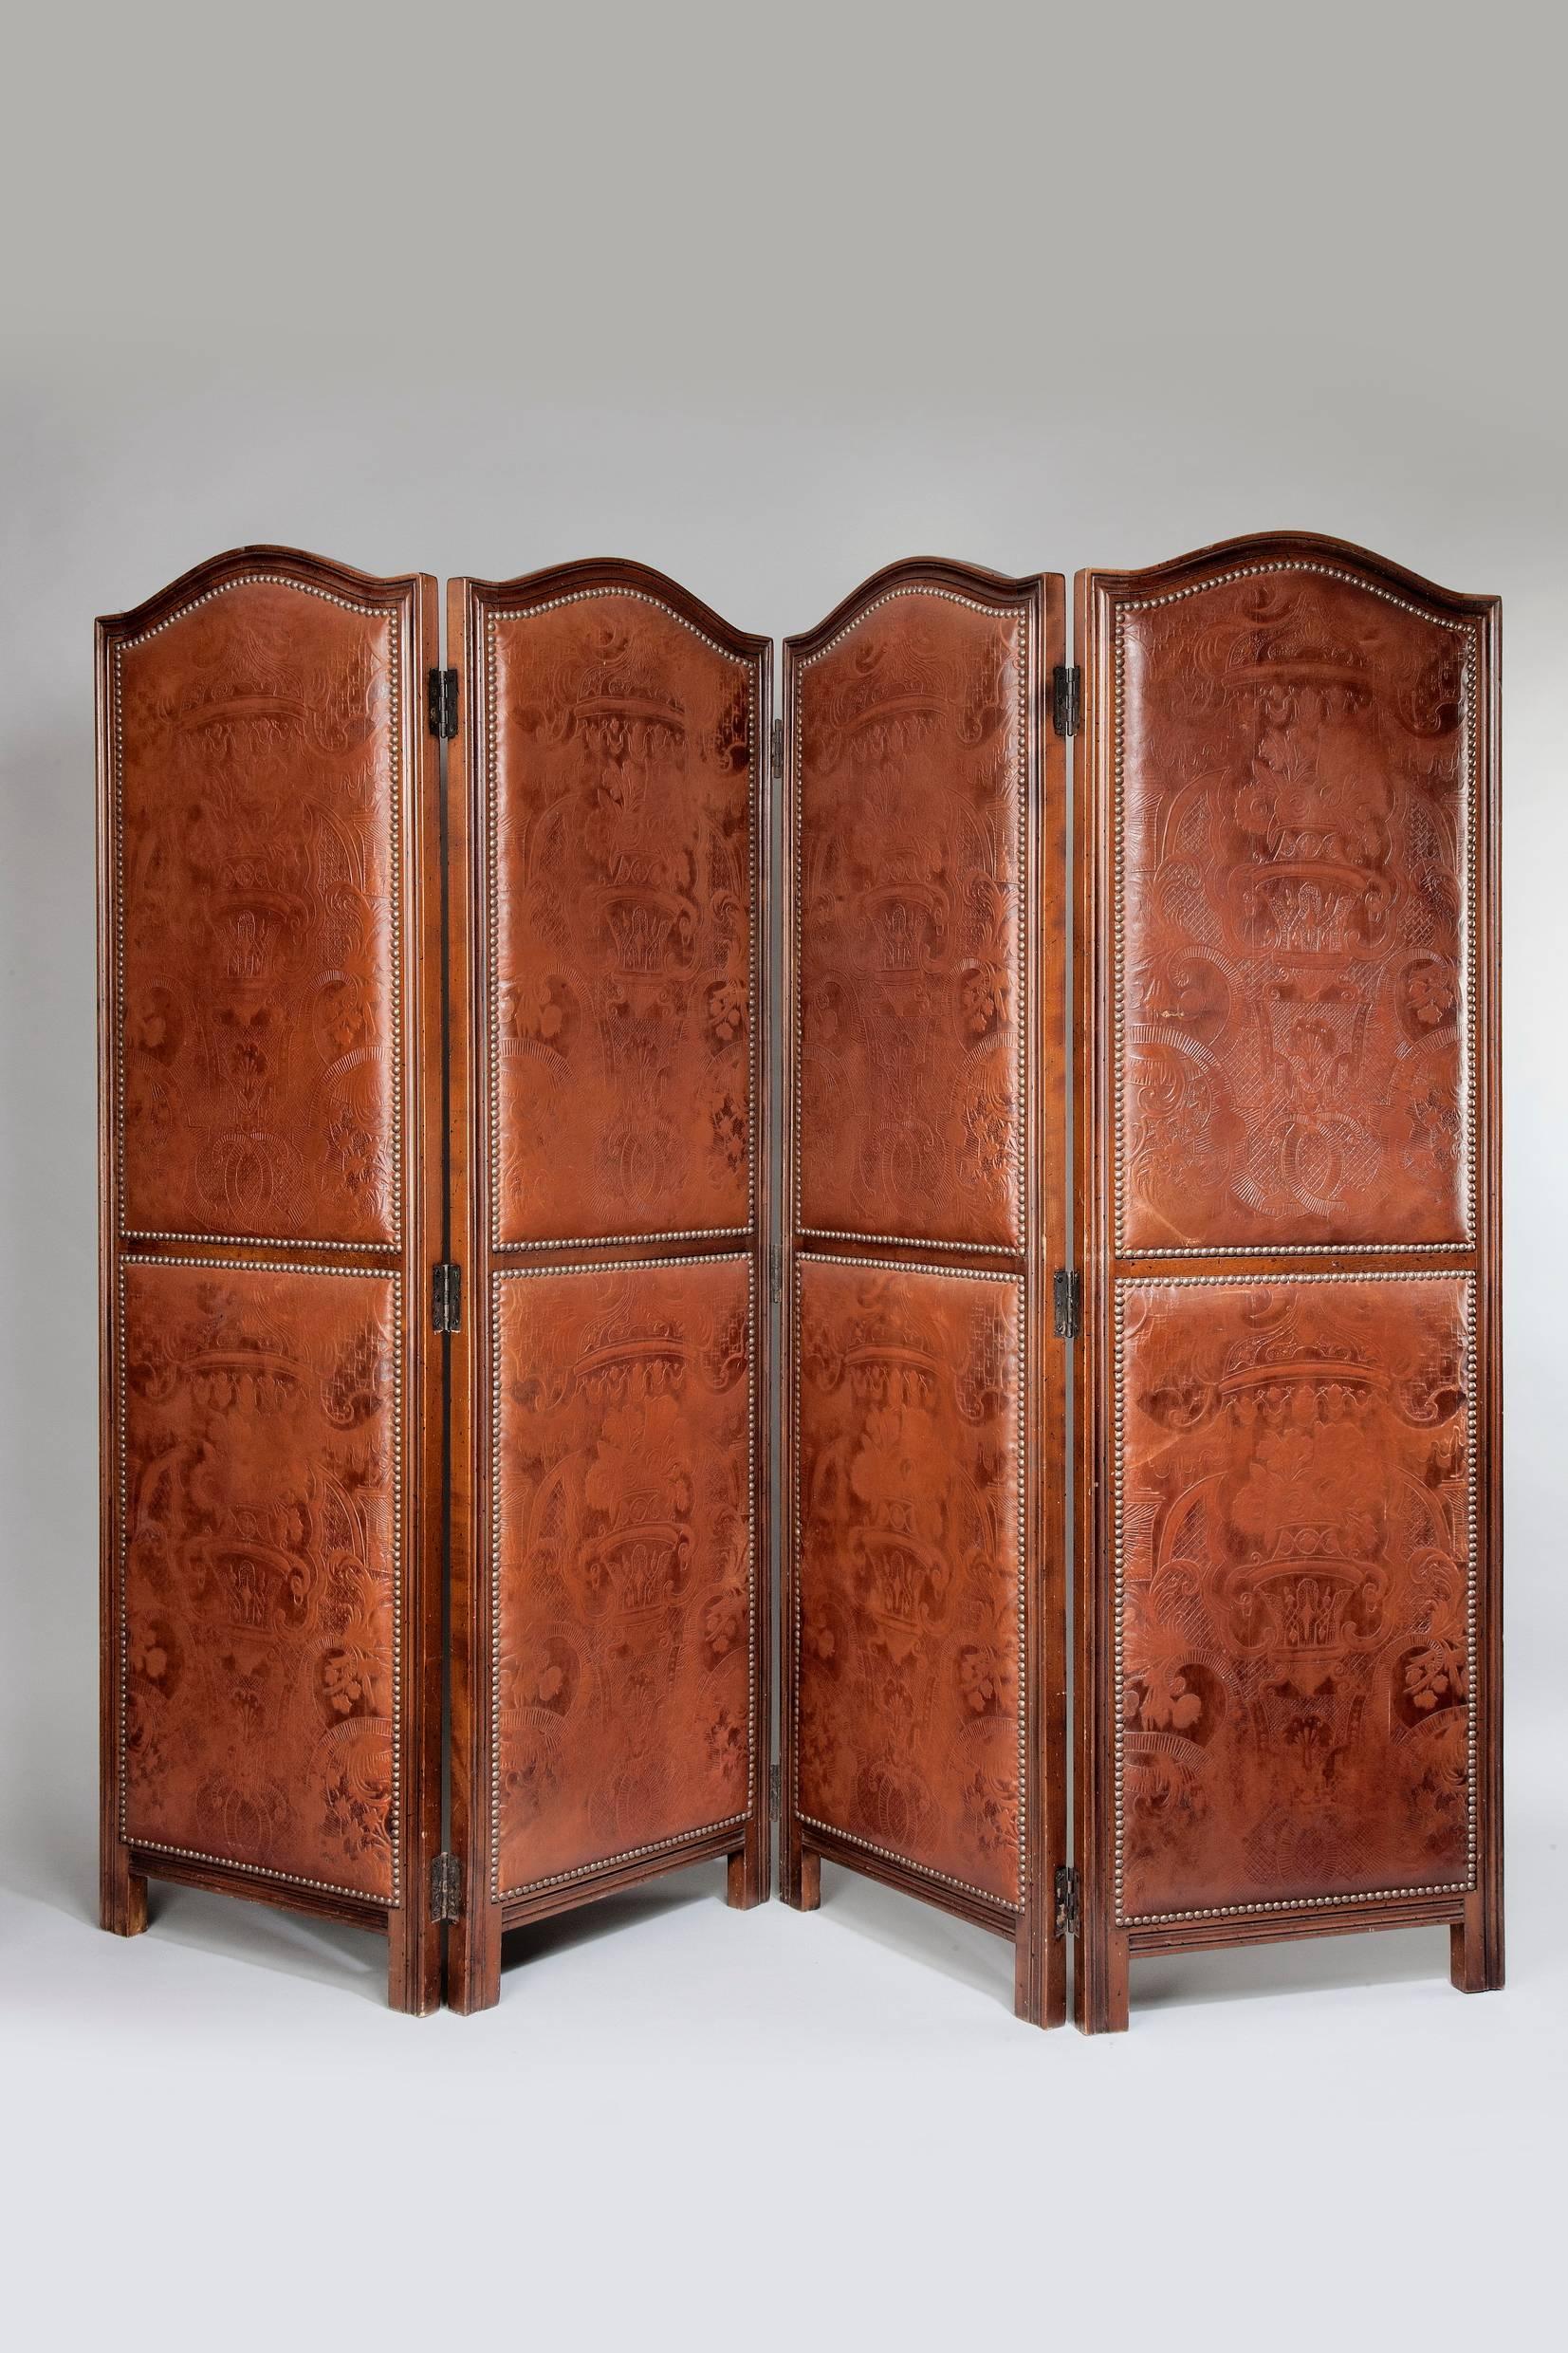 Art Nouveau Period Leather and Mahogany Four Fold Screen In Good Condition For Sale In Hungerford, Berkshire